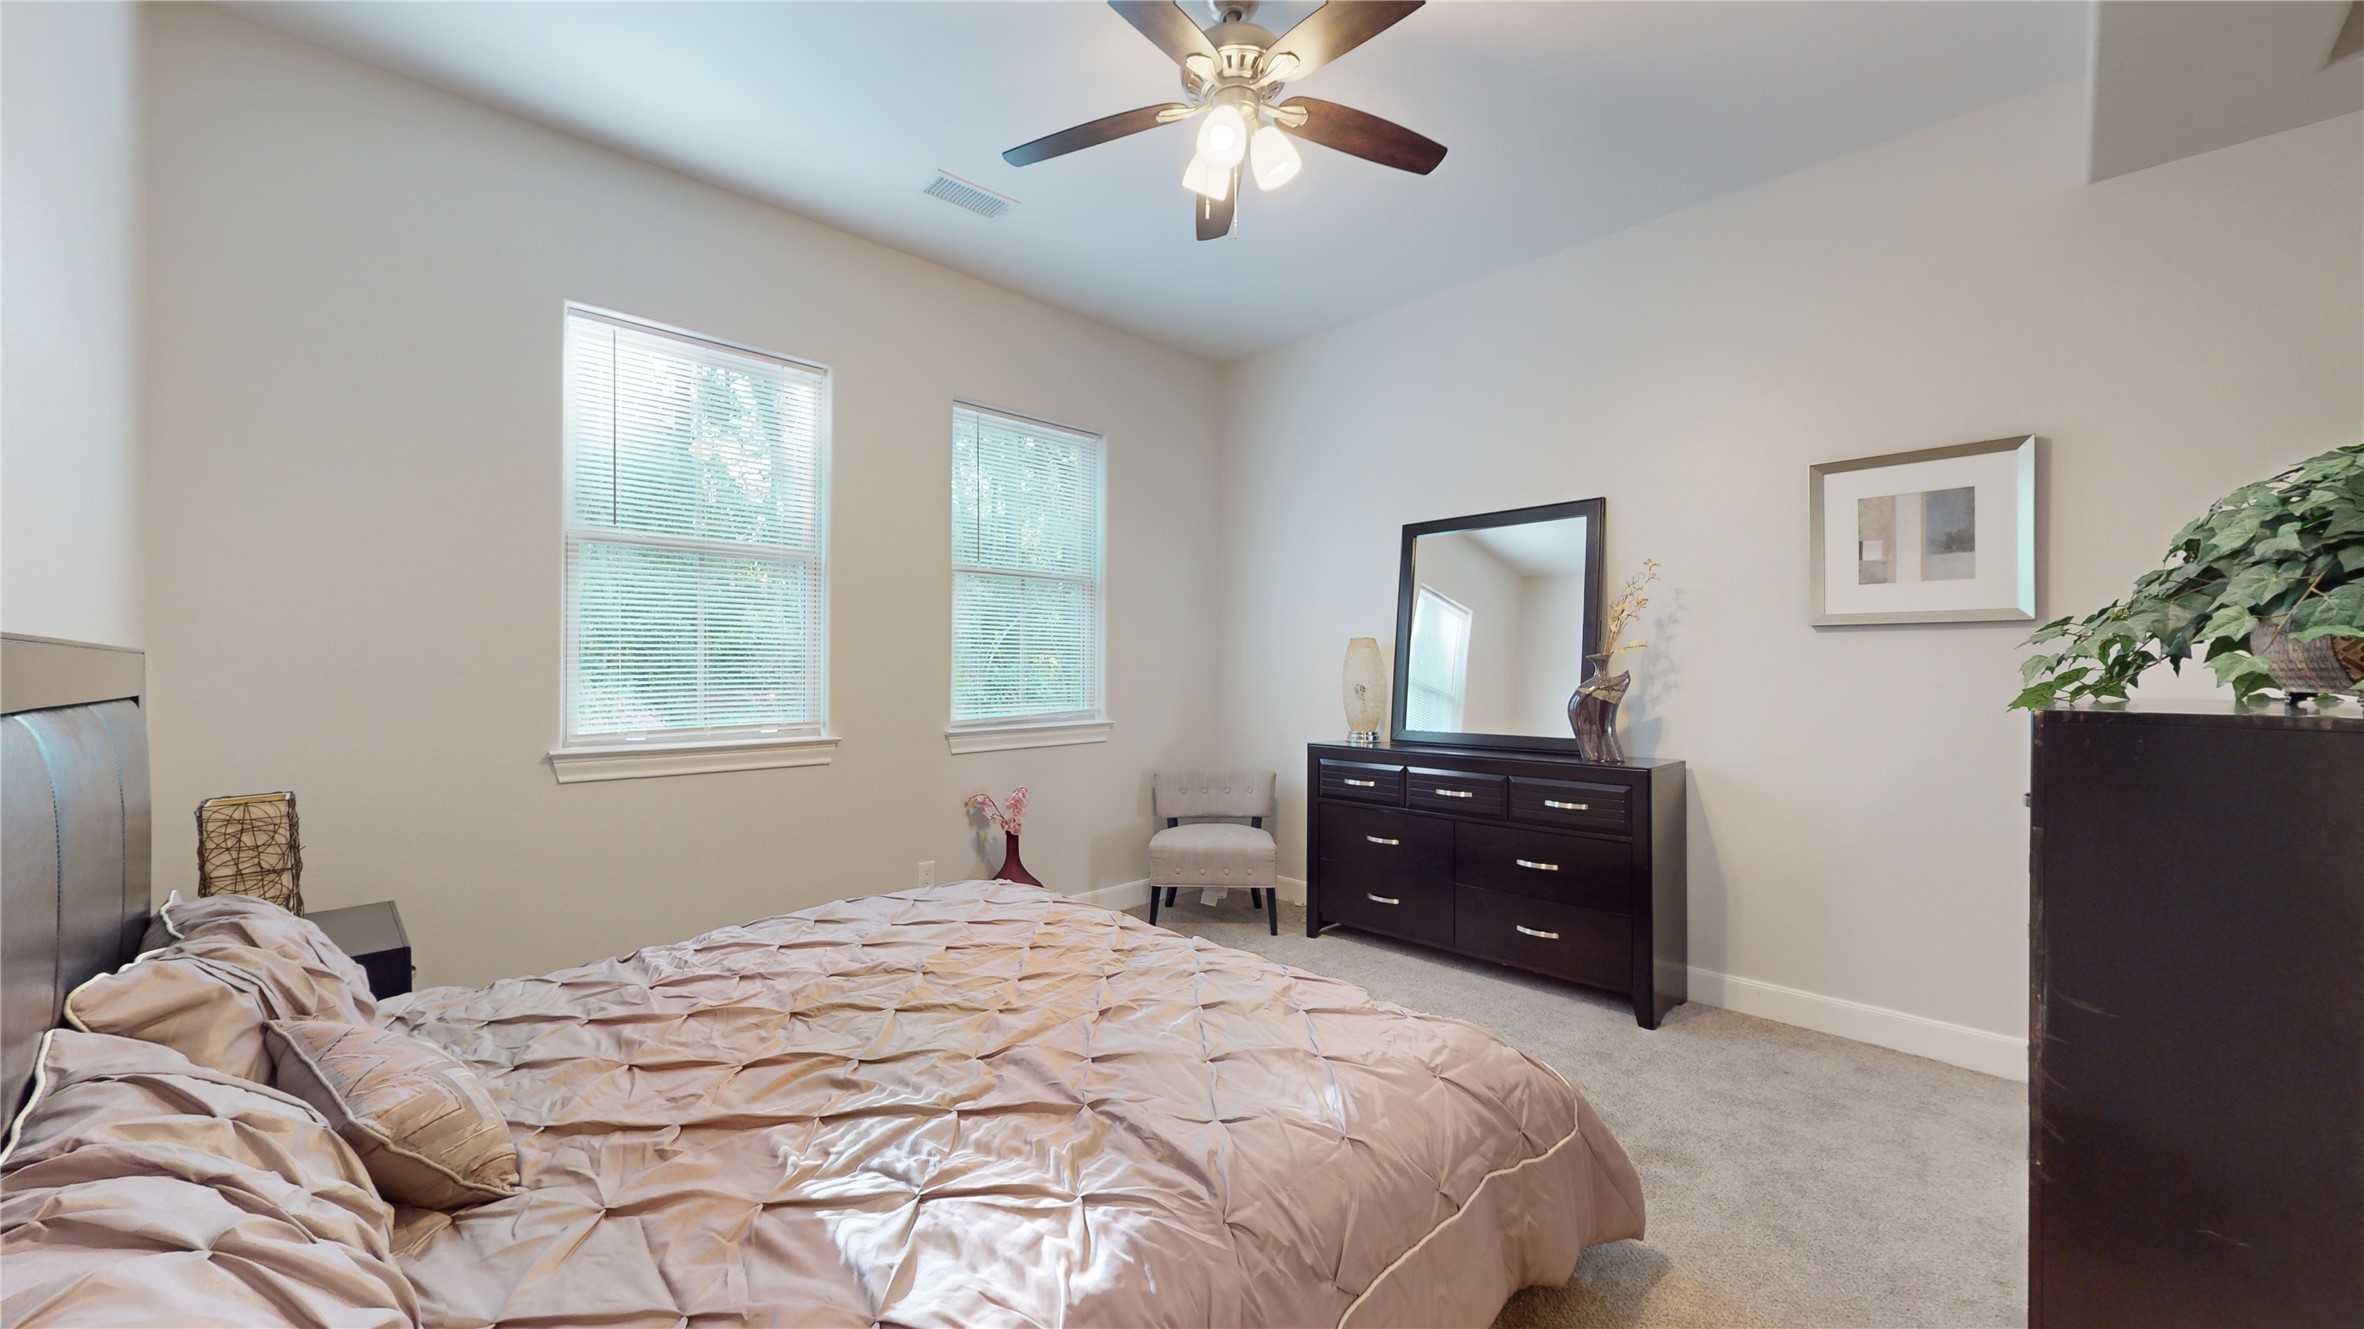 The Woodlands 1-story, 2-bed 504 Nursery Rd 1109-idx